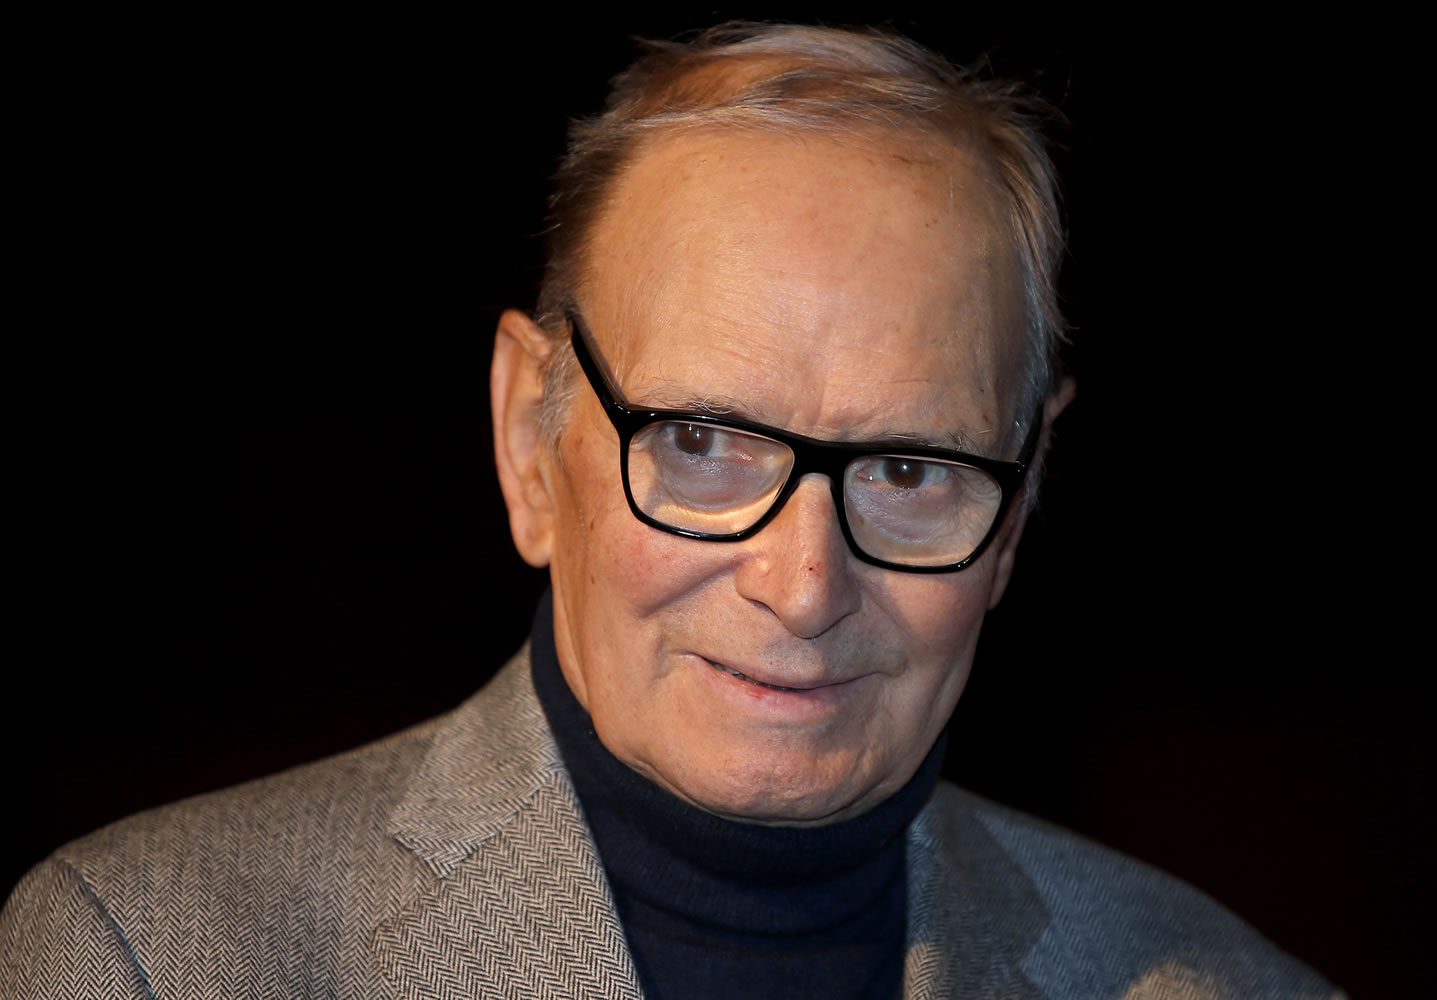 Composer Ennio Morricone won a Golden Globe award on Jan. 10 for composing the score for &quot;The Hateful Eight,&quot; a film by Quentin Tarantino. He was also nominated for an Oscar.